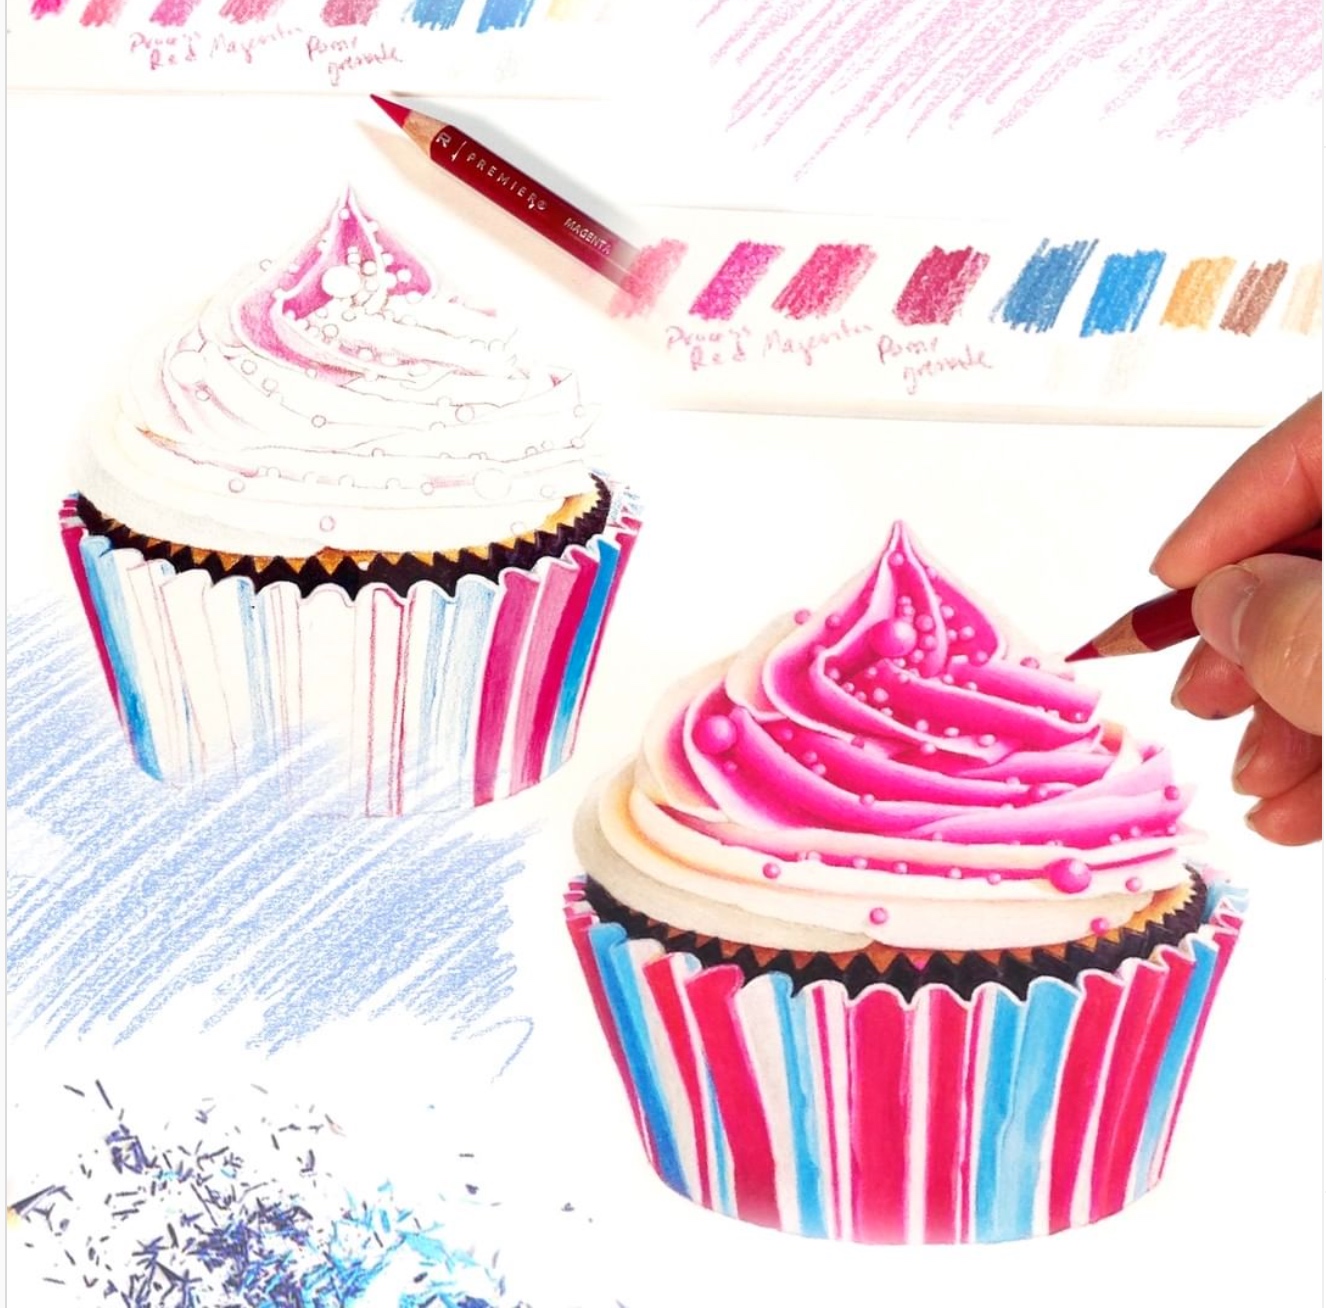 Cupcakes drawn with coloured pencil.